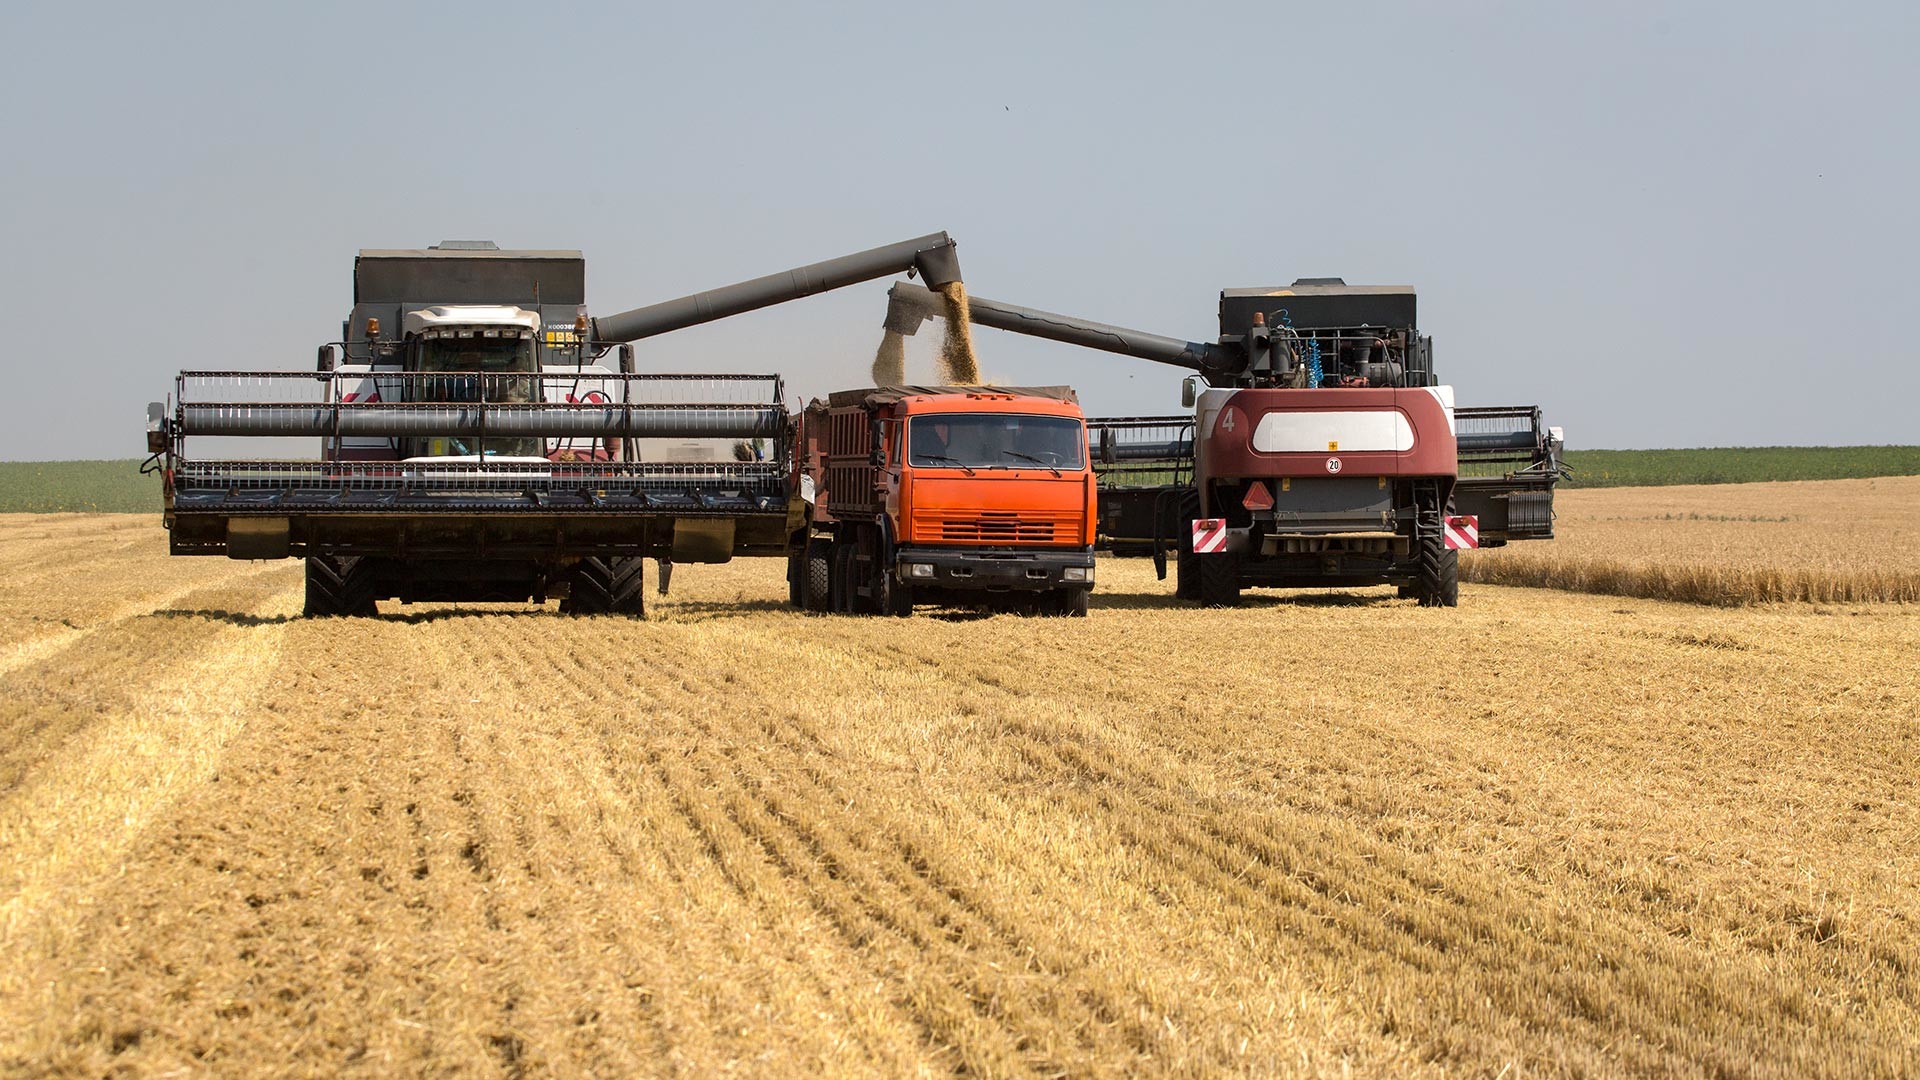 Harvesting combines in a wheat field.